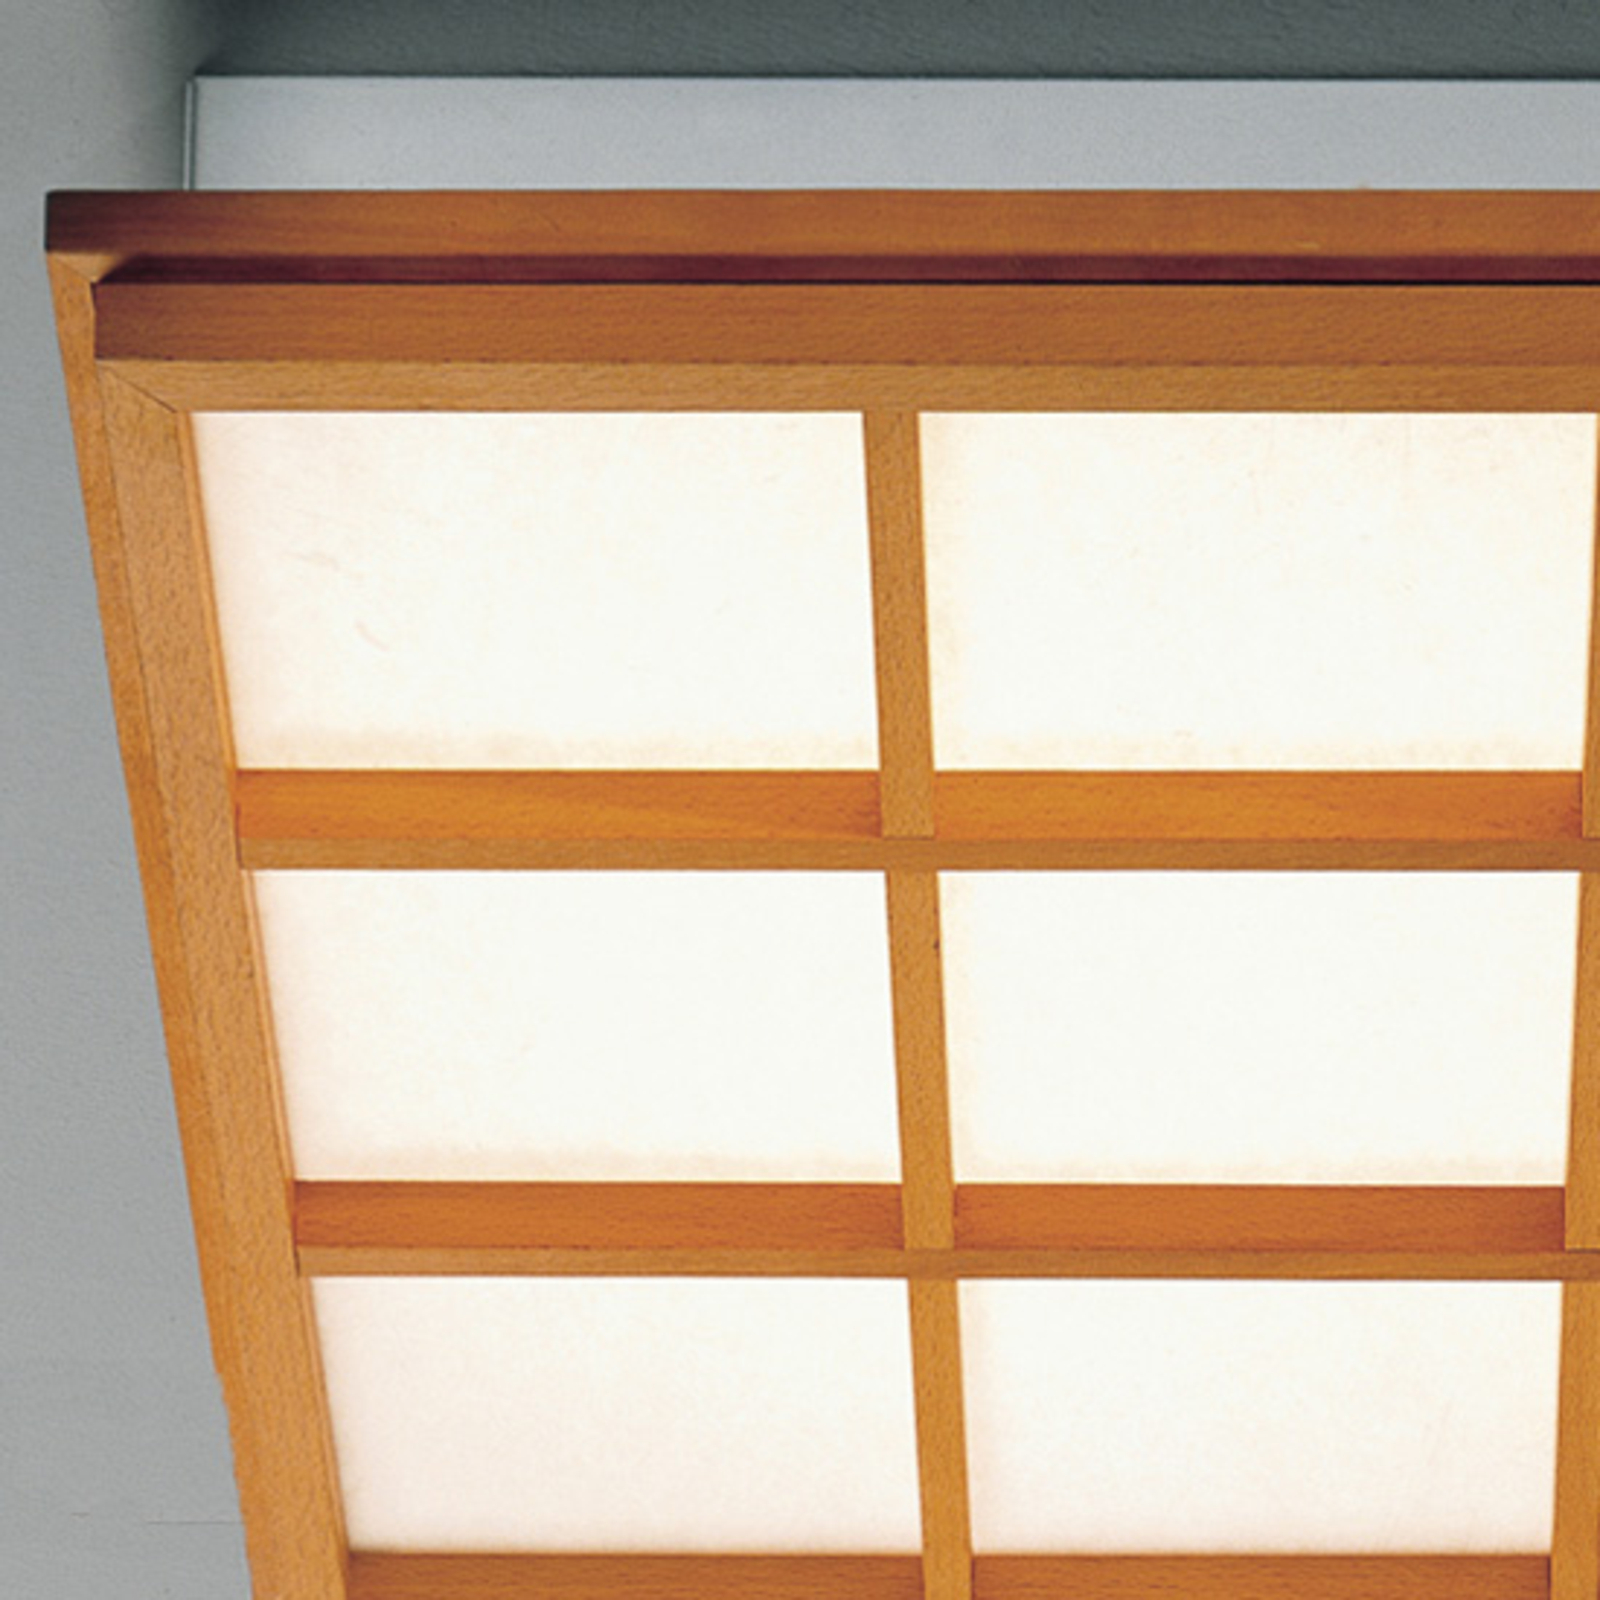 Beech wood ceiling light Kyoto 9 with LED